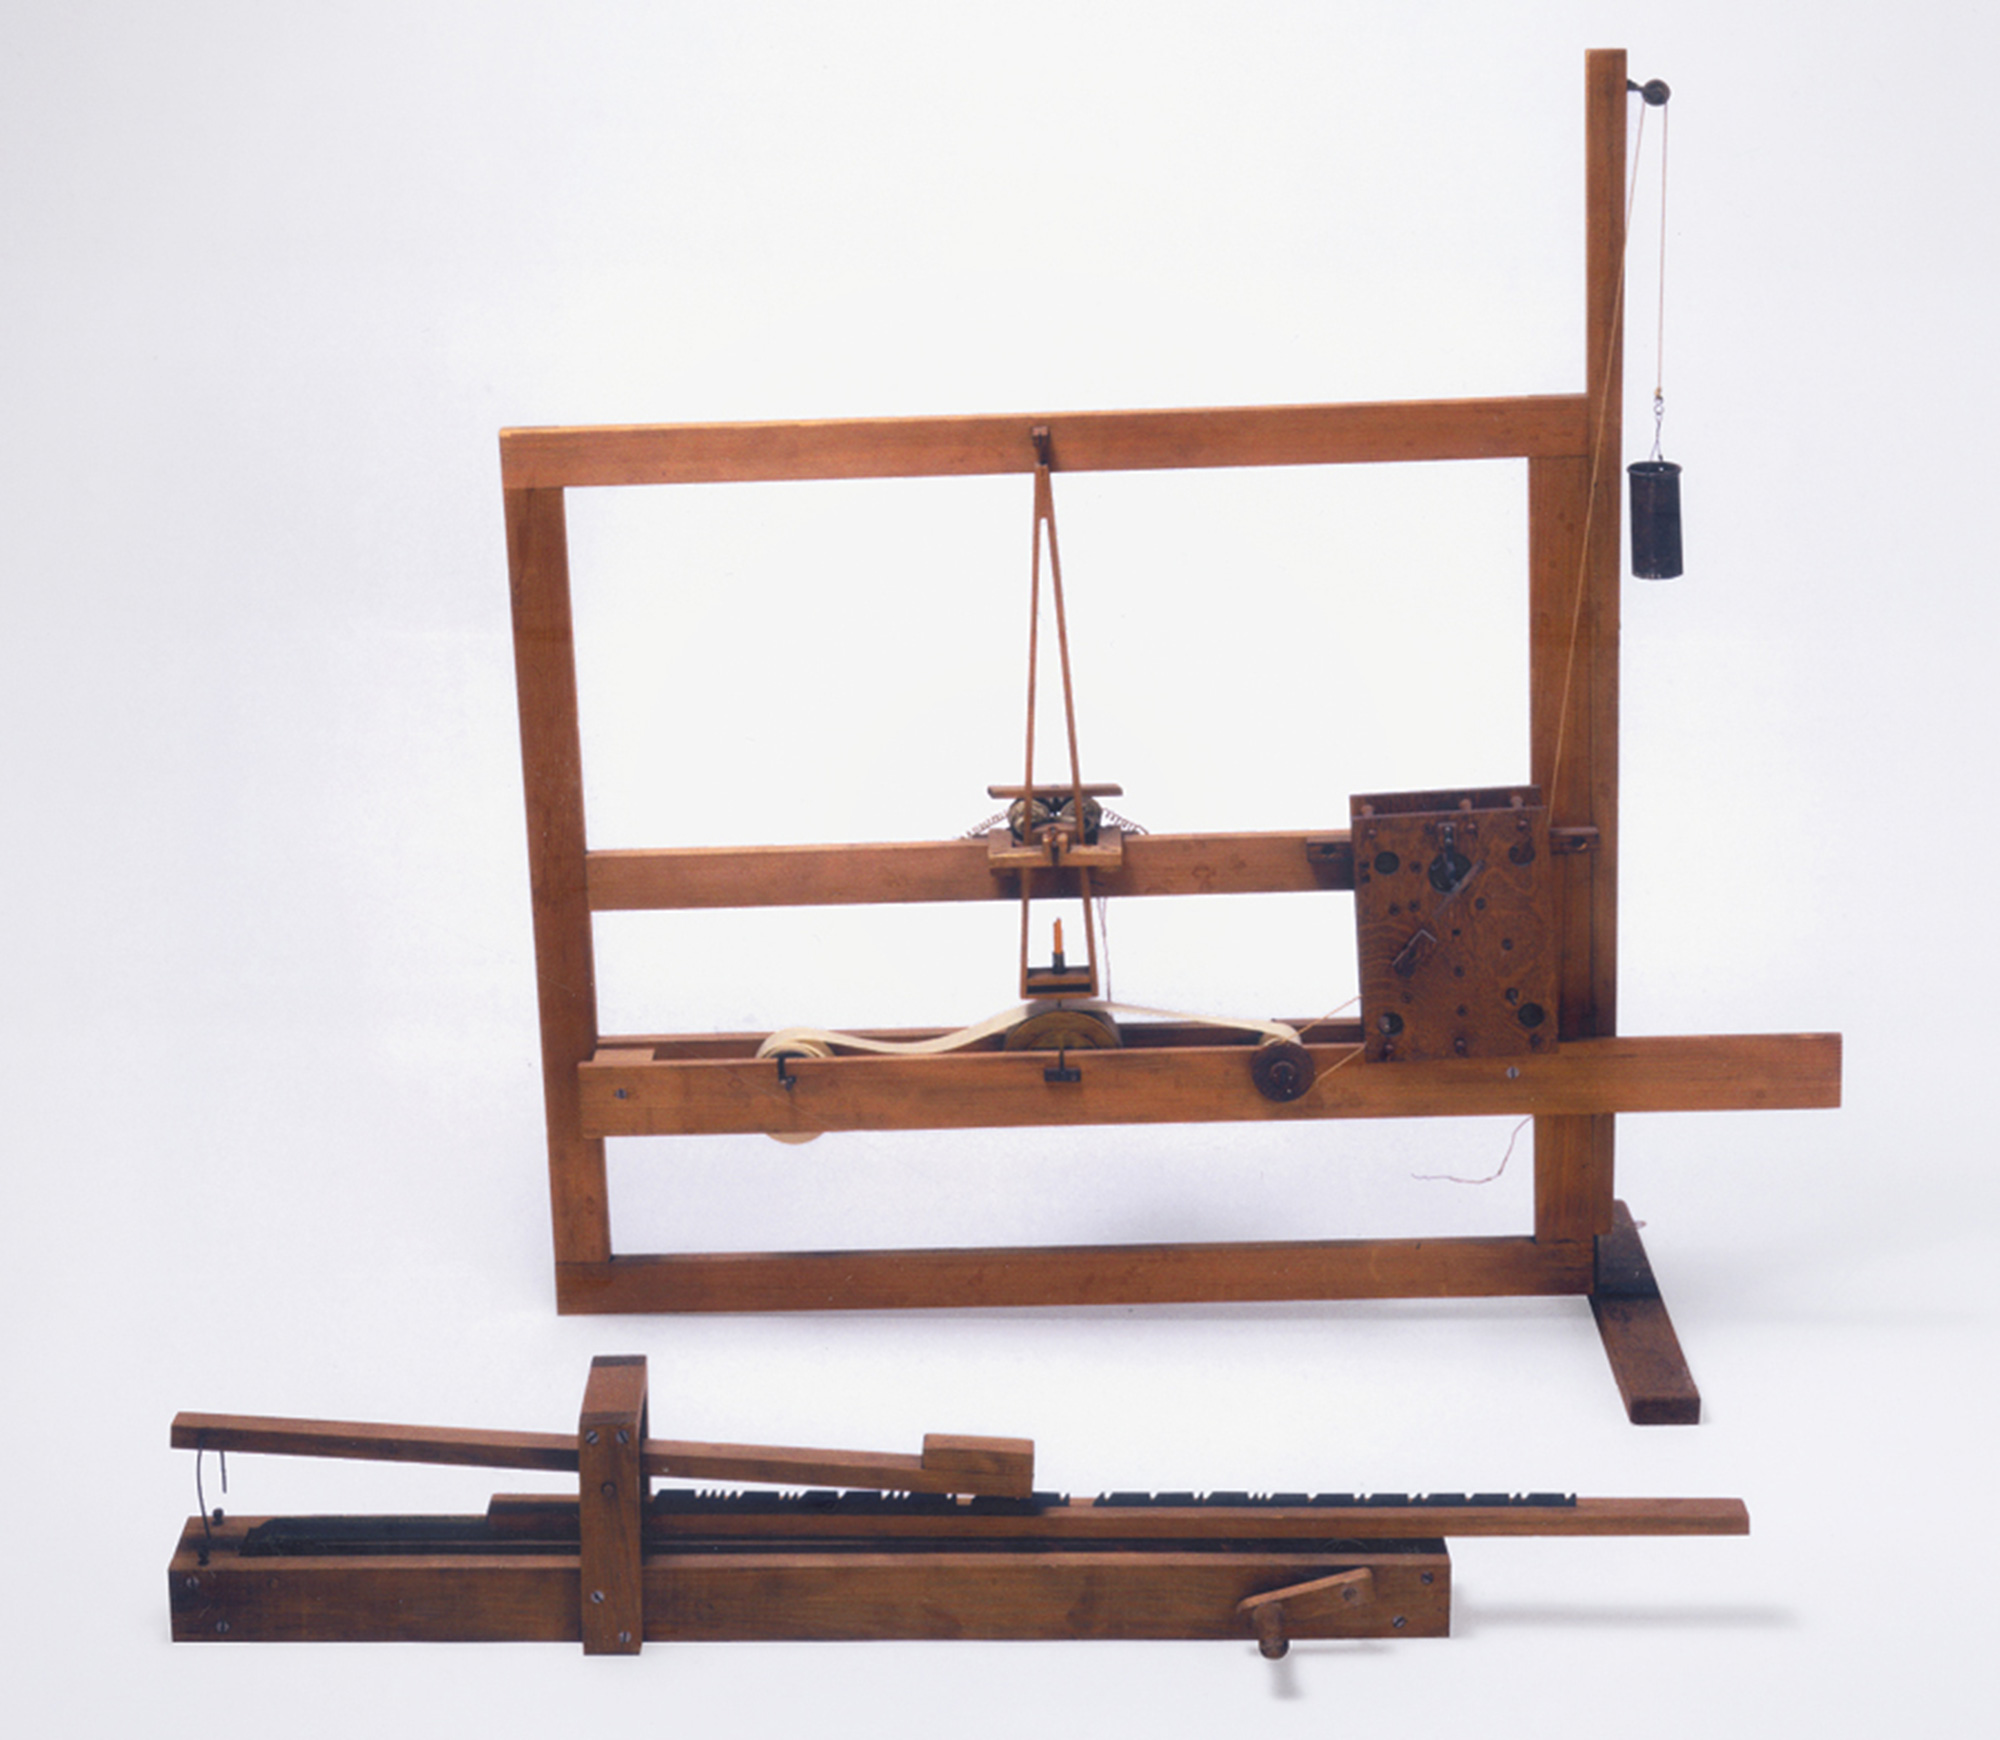 A photograph of a replica of Morse’s first telegraphic device, circa eighteen thirty-five.